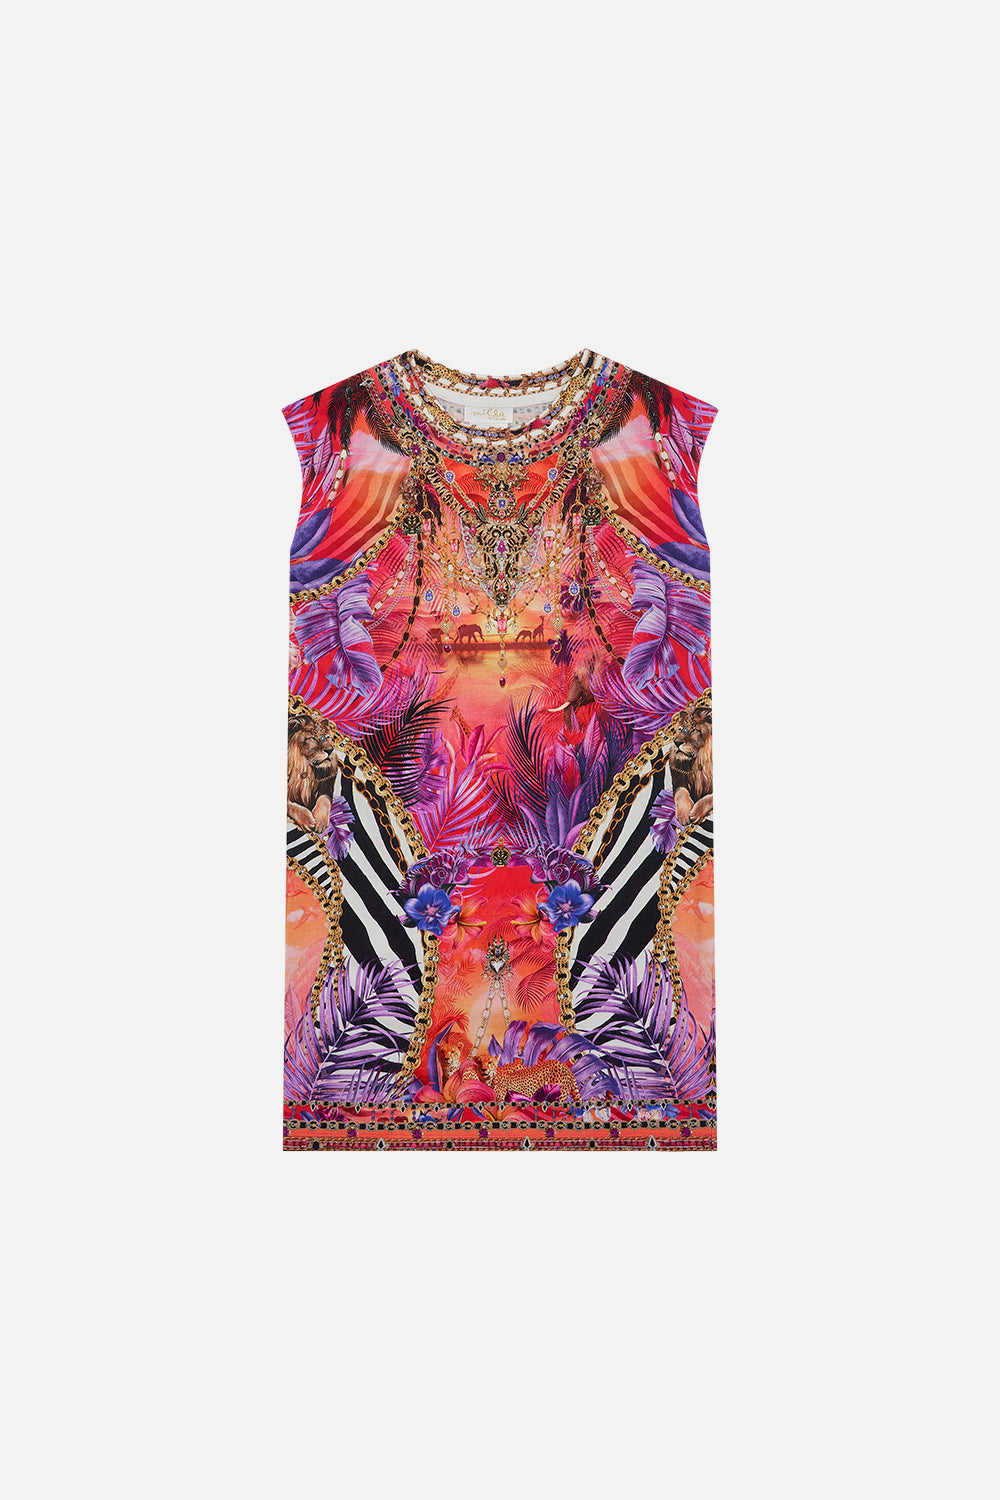 Product view of CAMILLA kids pink printed dress in Wild Loving print